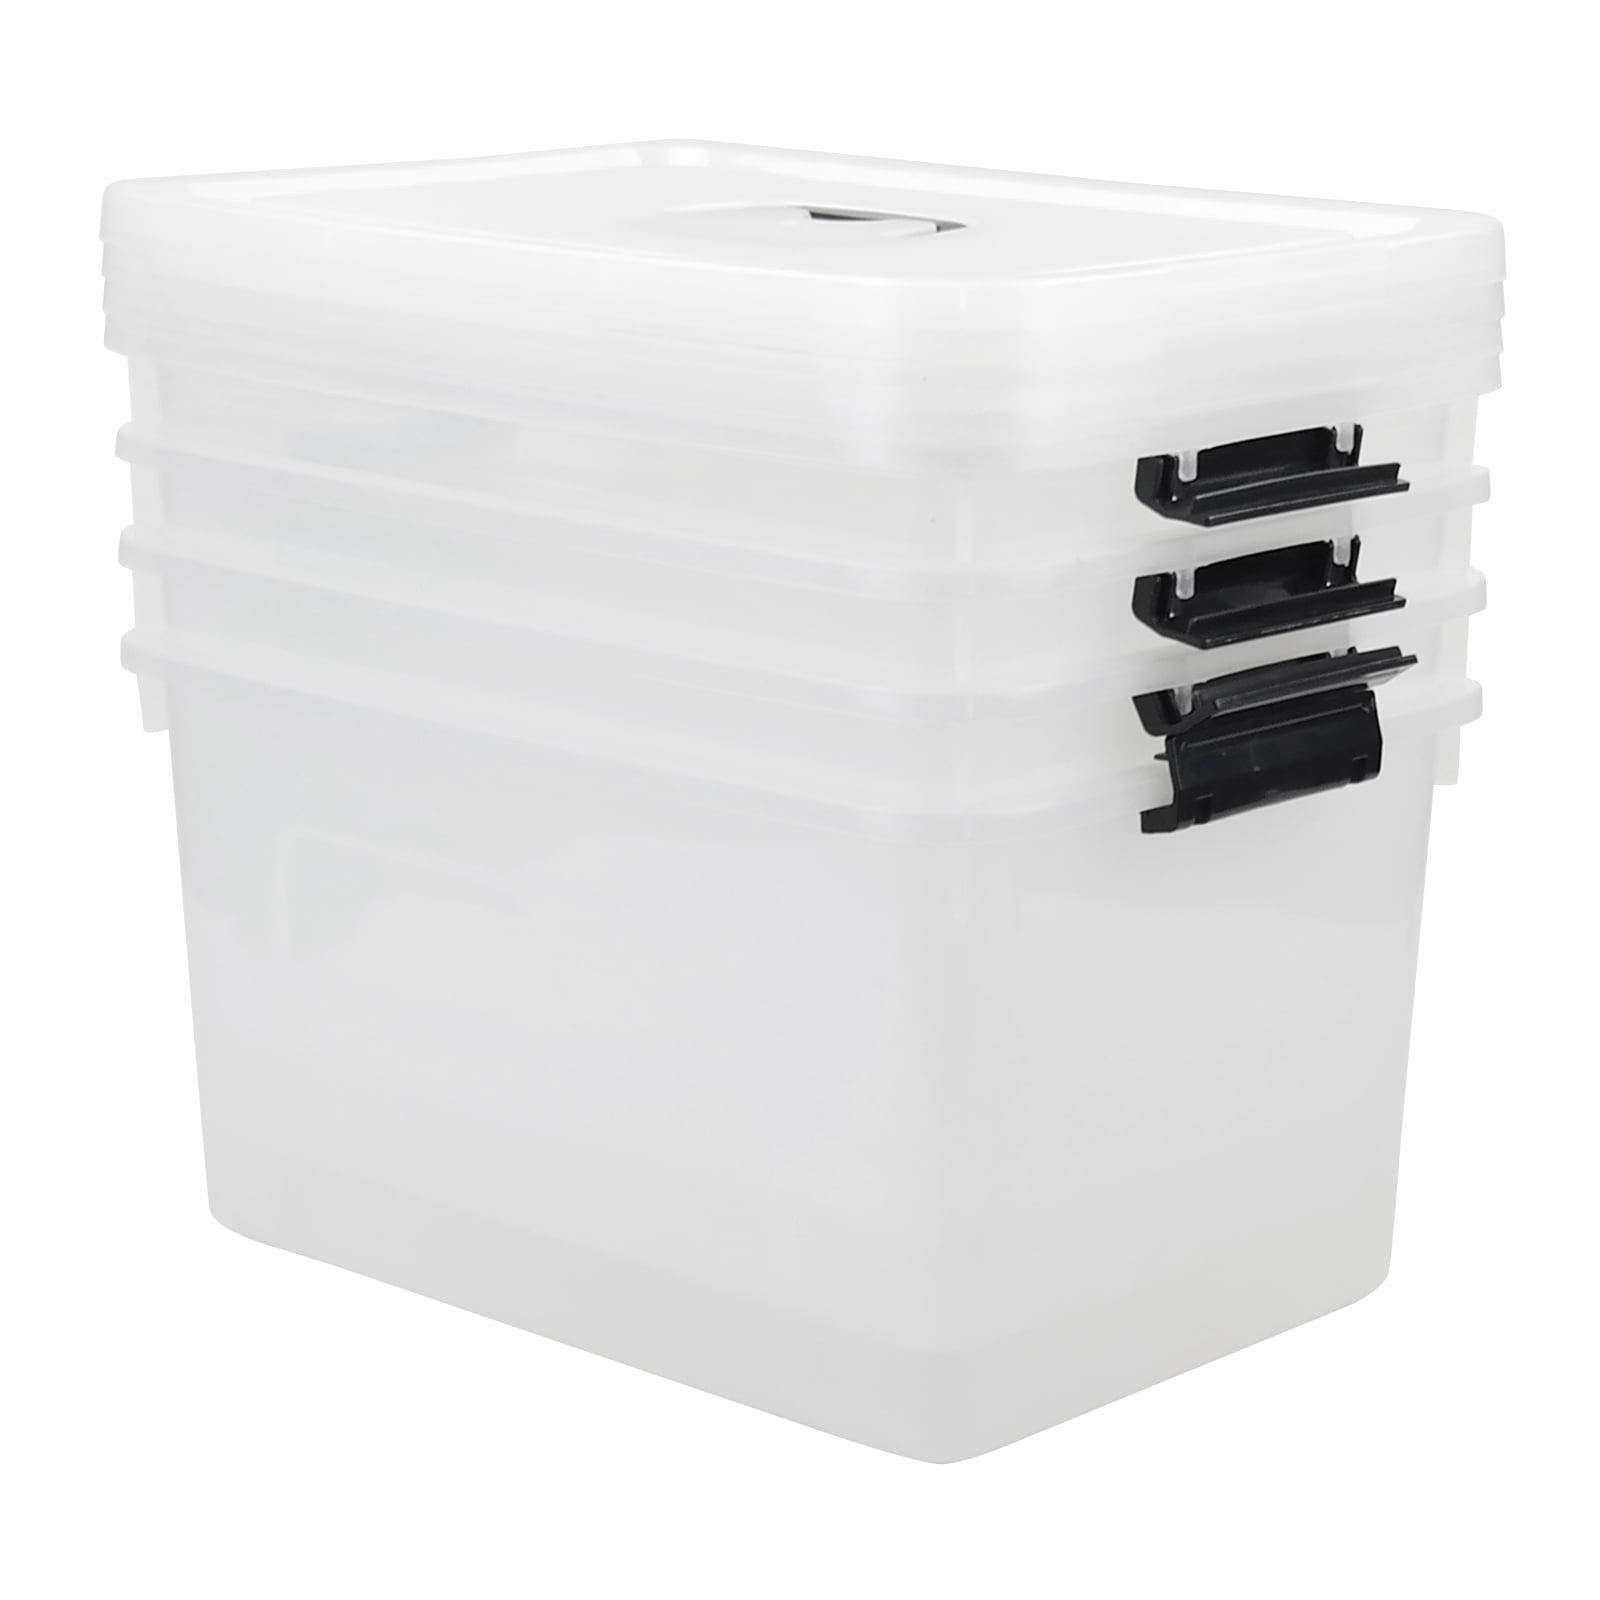 CadineUS 18 Liter Clear Boxes Totes, Plastic Storage Bin with Handles Set of 4